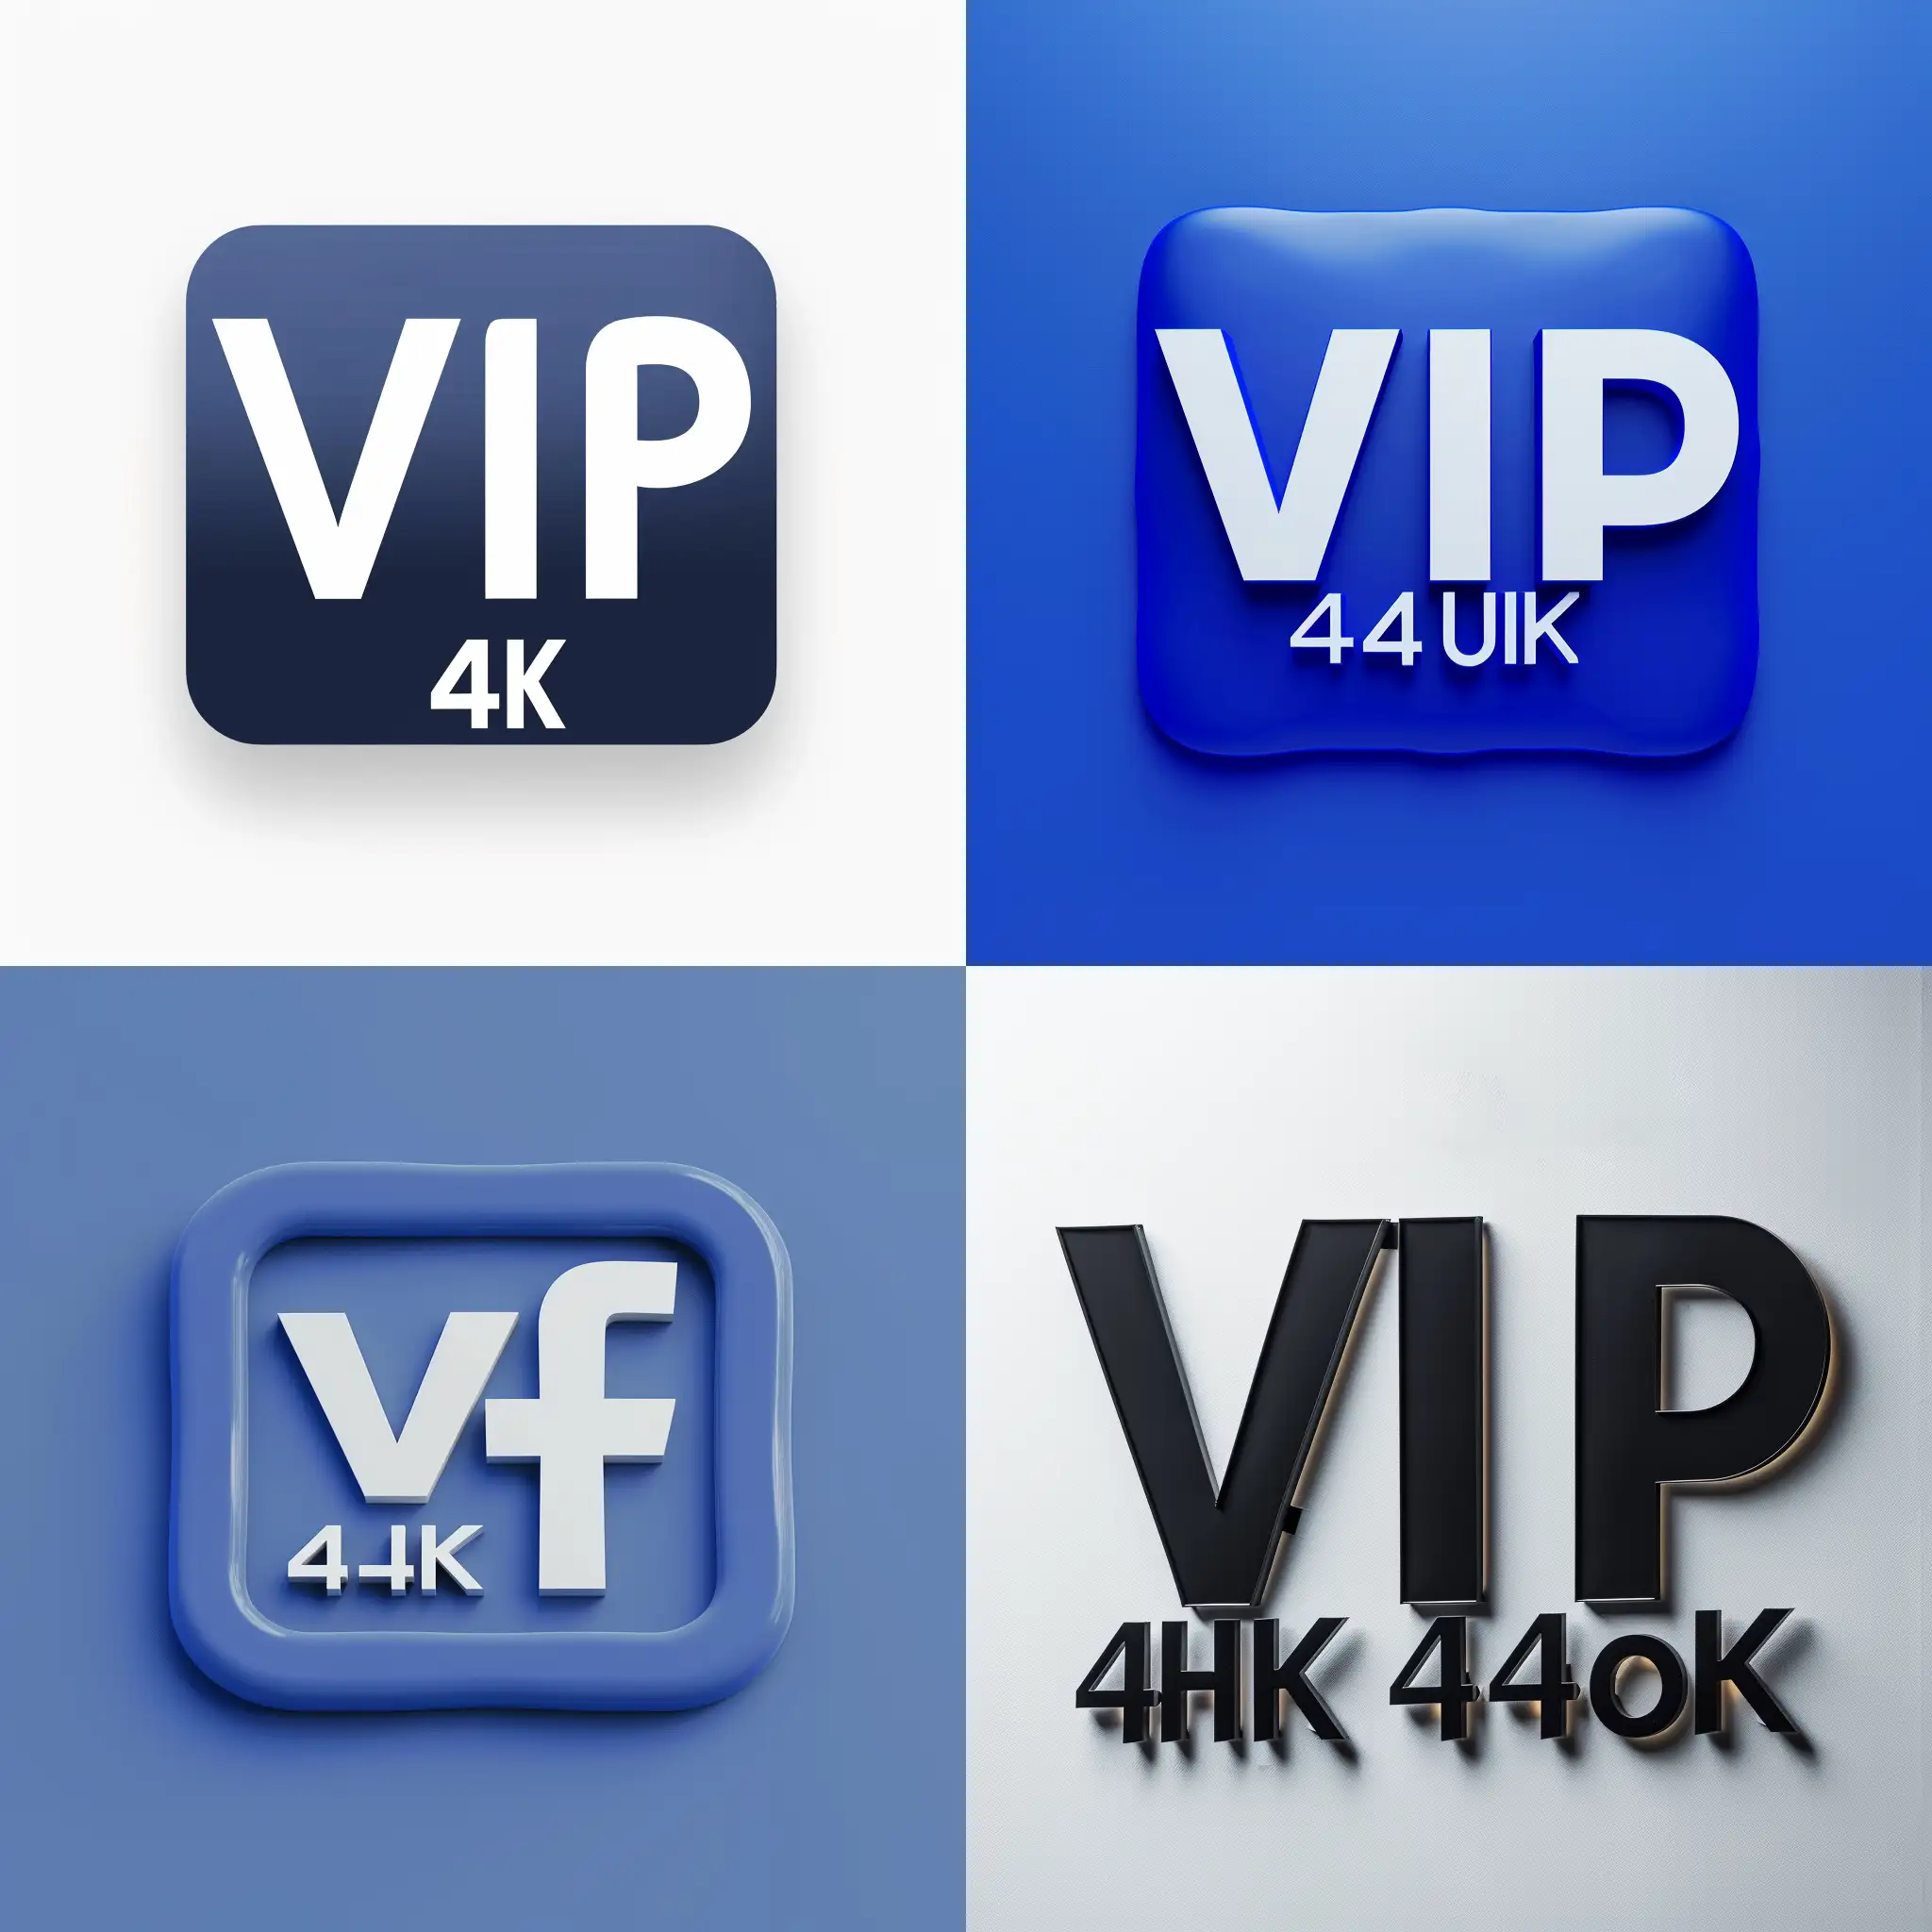 minimalist clean facebook banner image, my facebook page name: VIP 4k UK, ratio 16:9, ingnore anyother ration and keep 16:9 